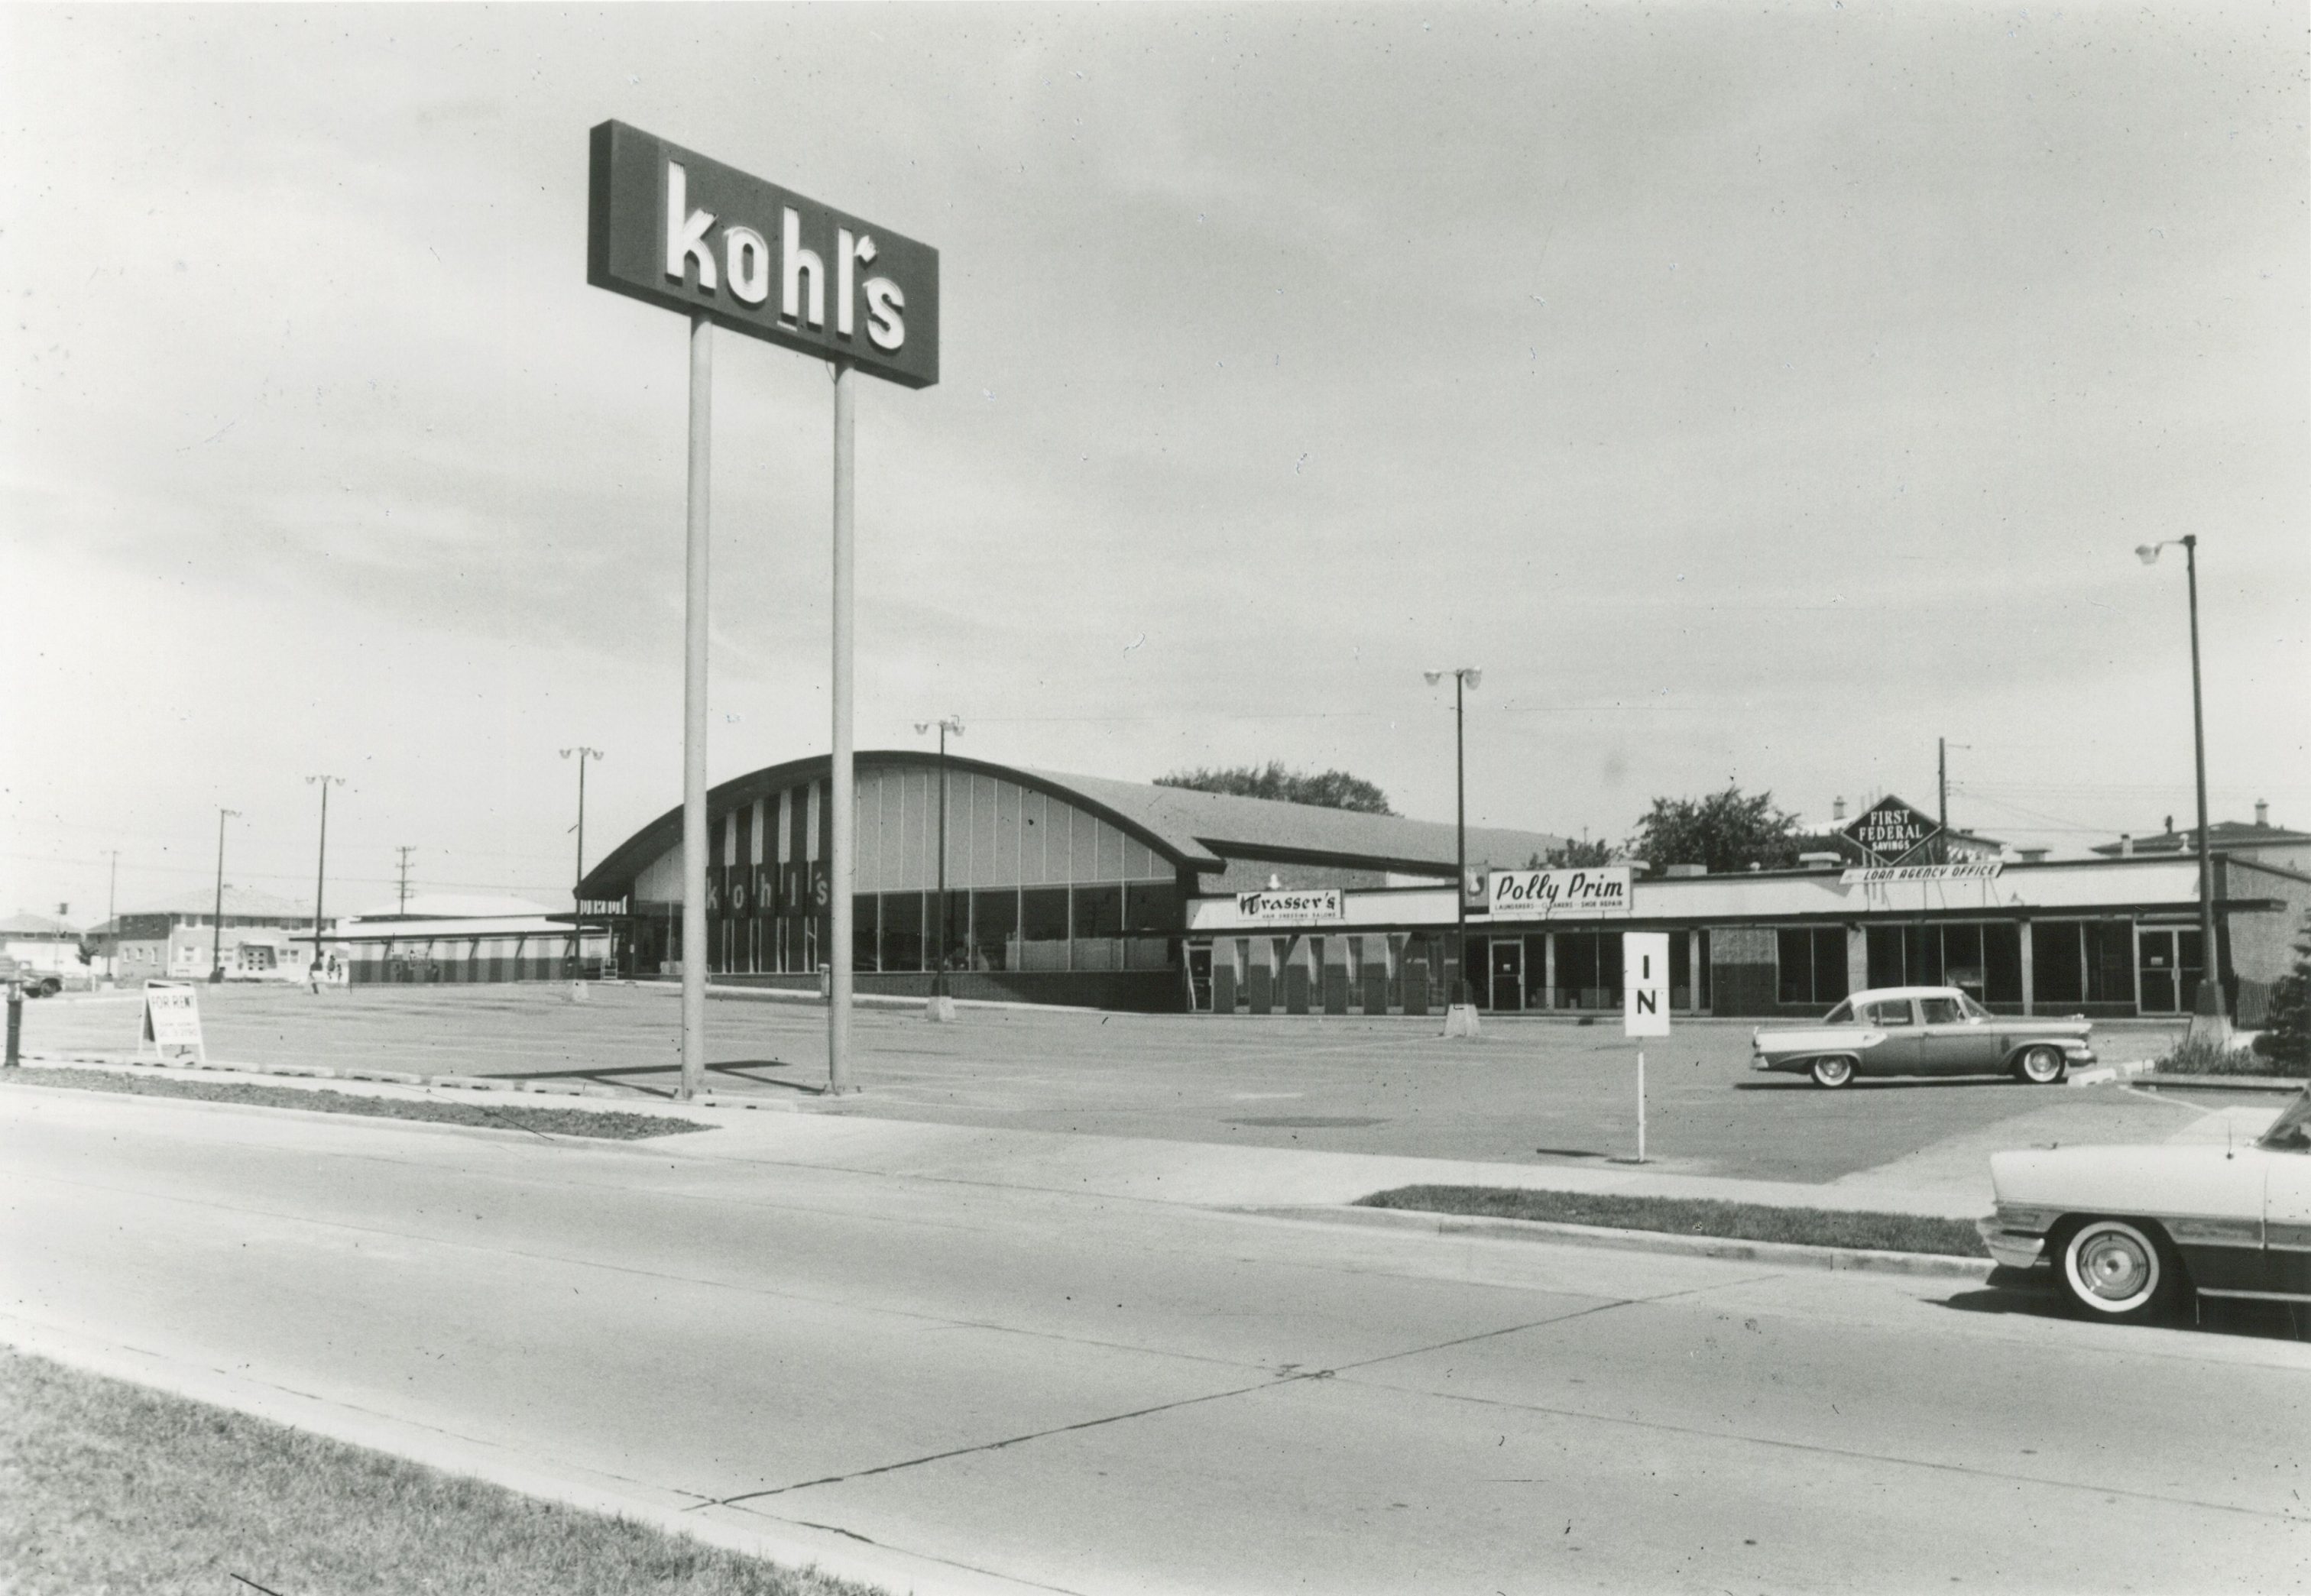 Prior to transition to a department store, Kohl's grocery stores, like this one on 64th and Silver Spring, were located throughout Milwaukee. 